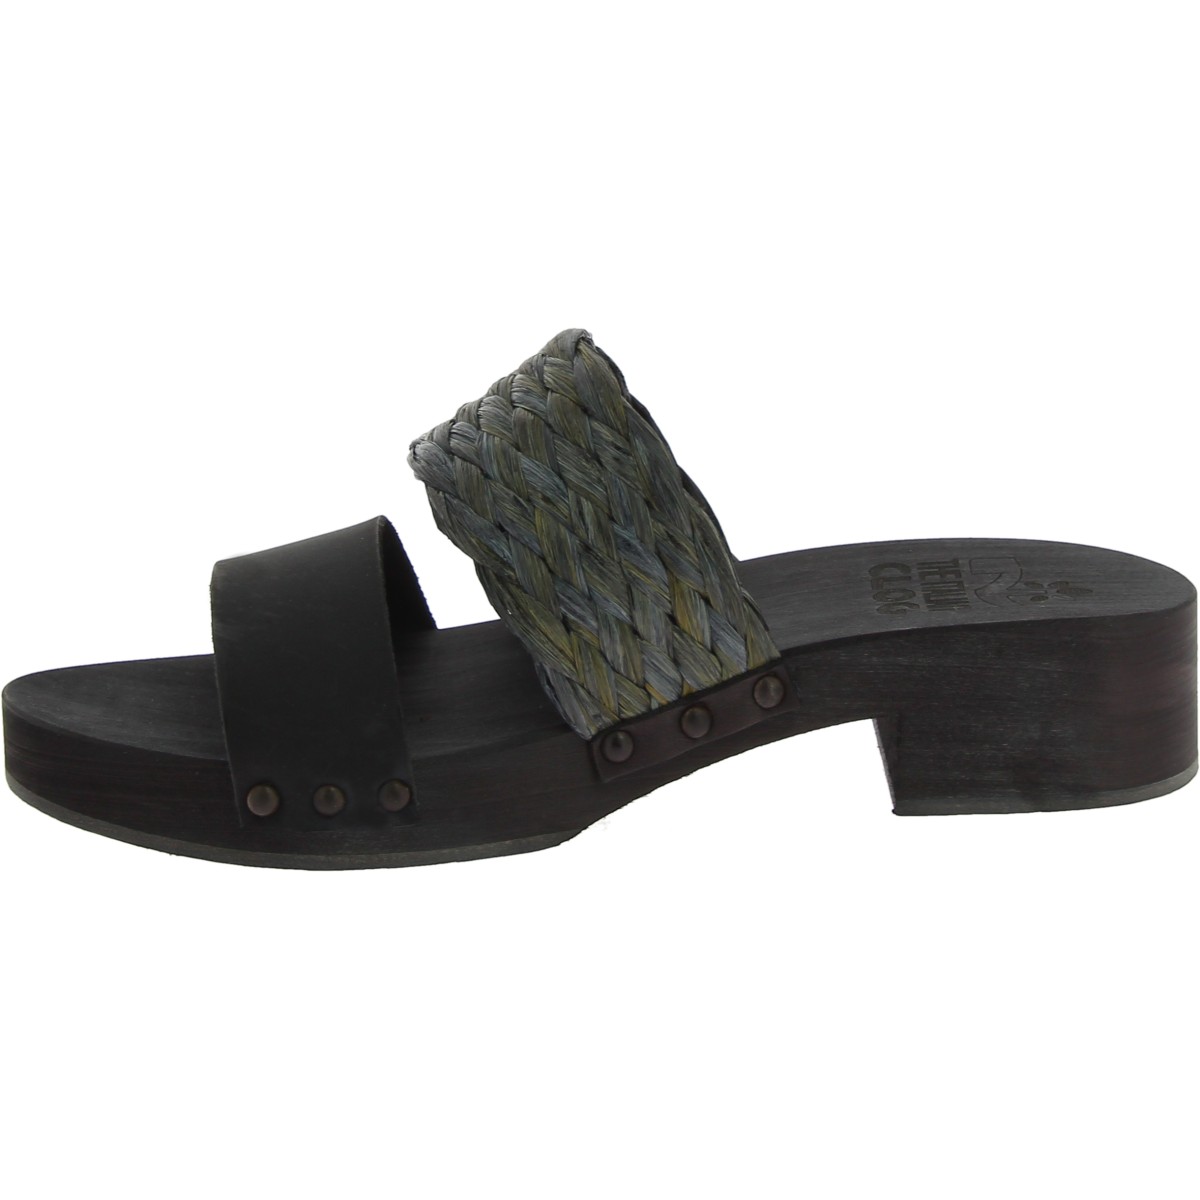 Black mules with leather and rafia band Handmade | The leather craftsmen